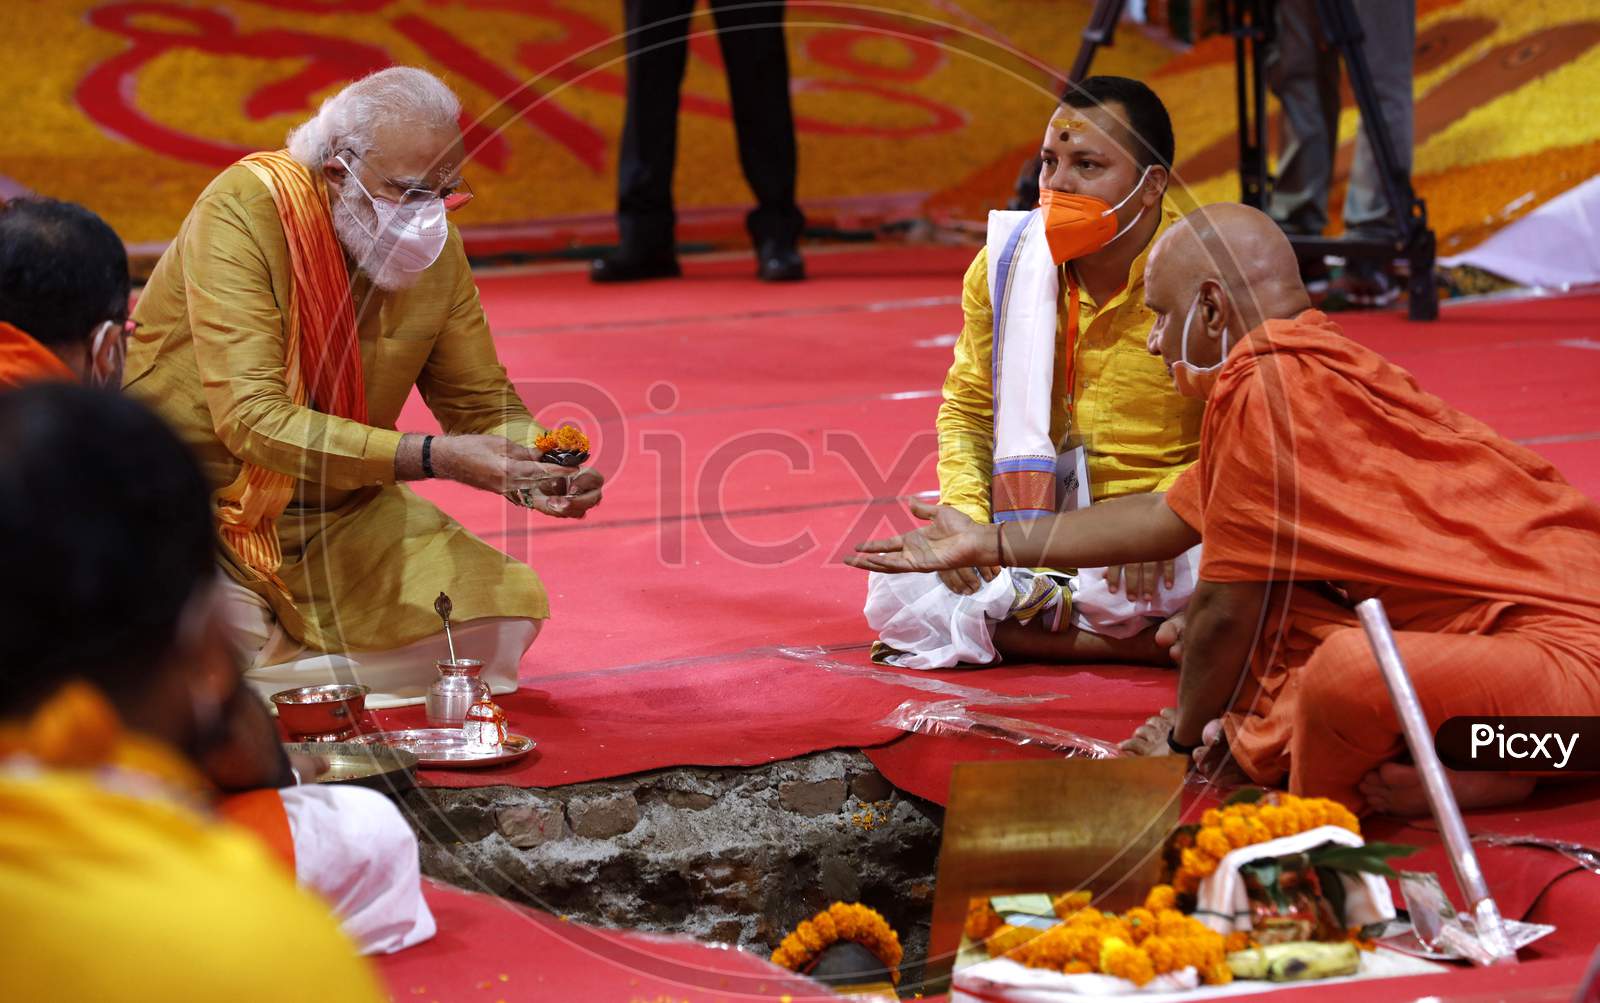 Prime Minister Narendra Modi performs rituals during the foundation laying ceremony for the Hindu Lord Ram's temple, in Ayodhya, India, August 5, 2020.